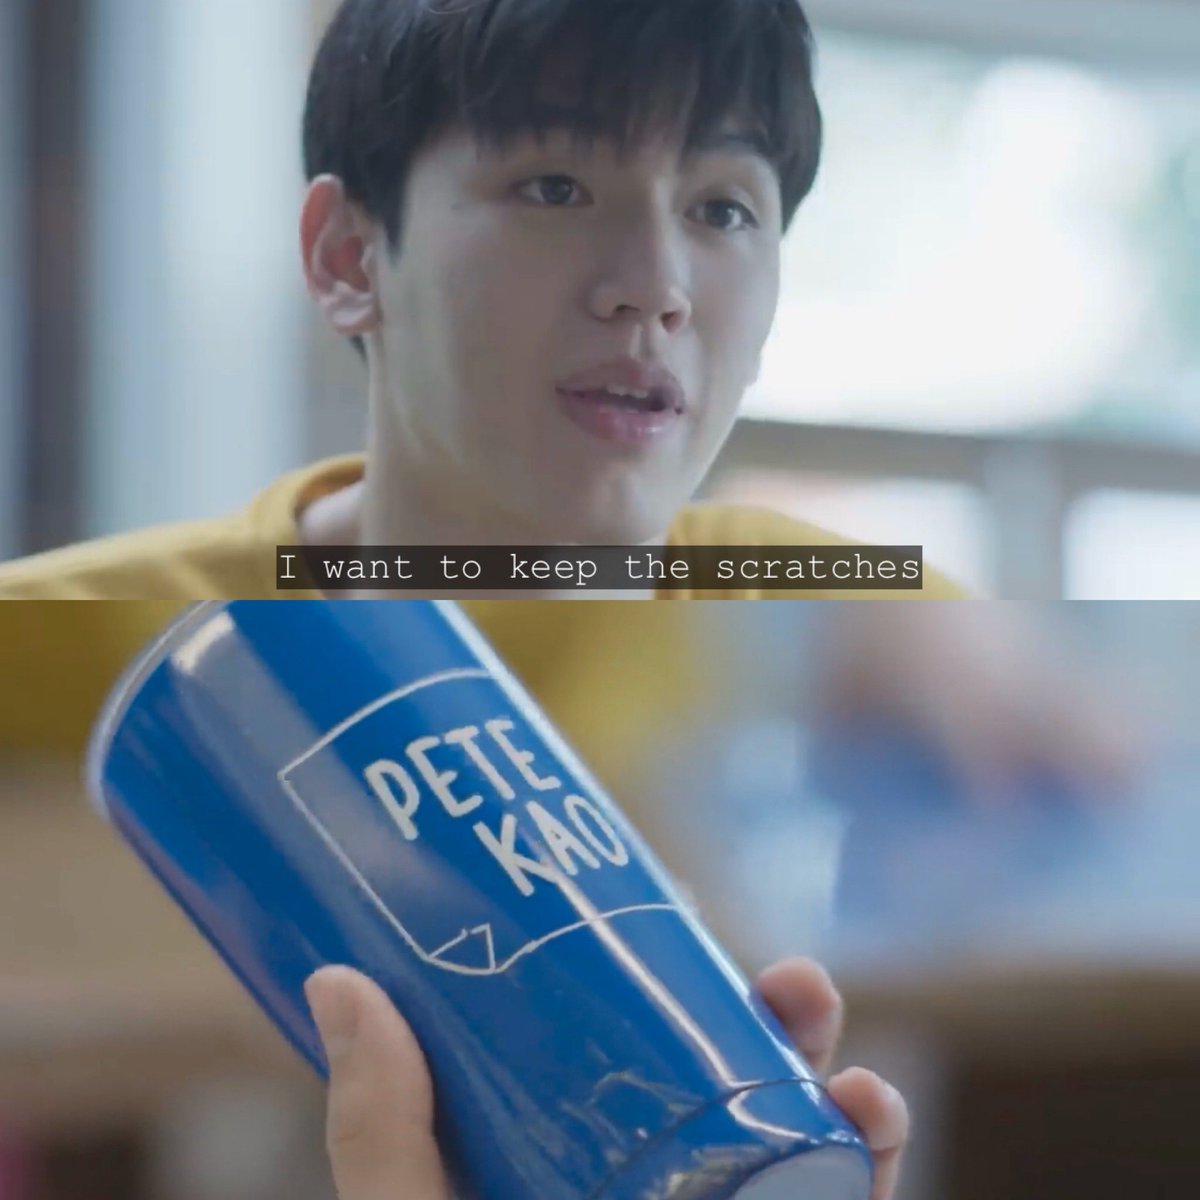 EP11: symbolismpetekao tumbler with cover = their relationship that has to be hiddenpetekao tumbler with scratches = their relationship that ruined and left the scarskao doesn’t want the tumbler to be replaced by a new one